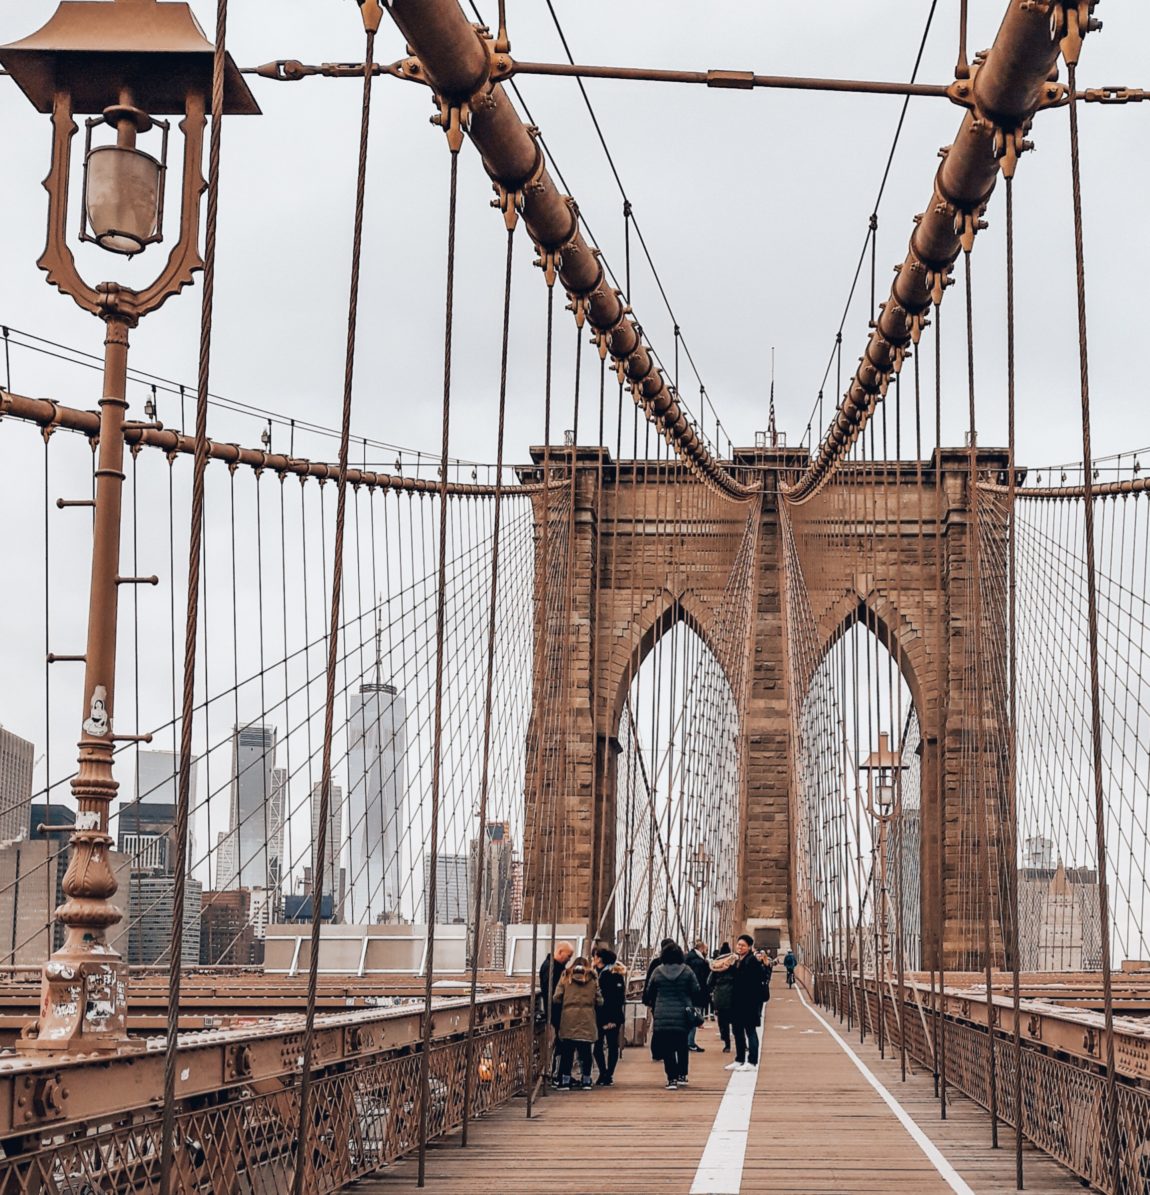 Must-see Attractions in New York City - A Travel Guide for First-Timer's